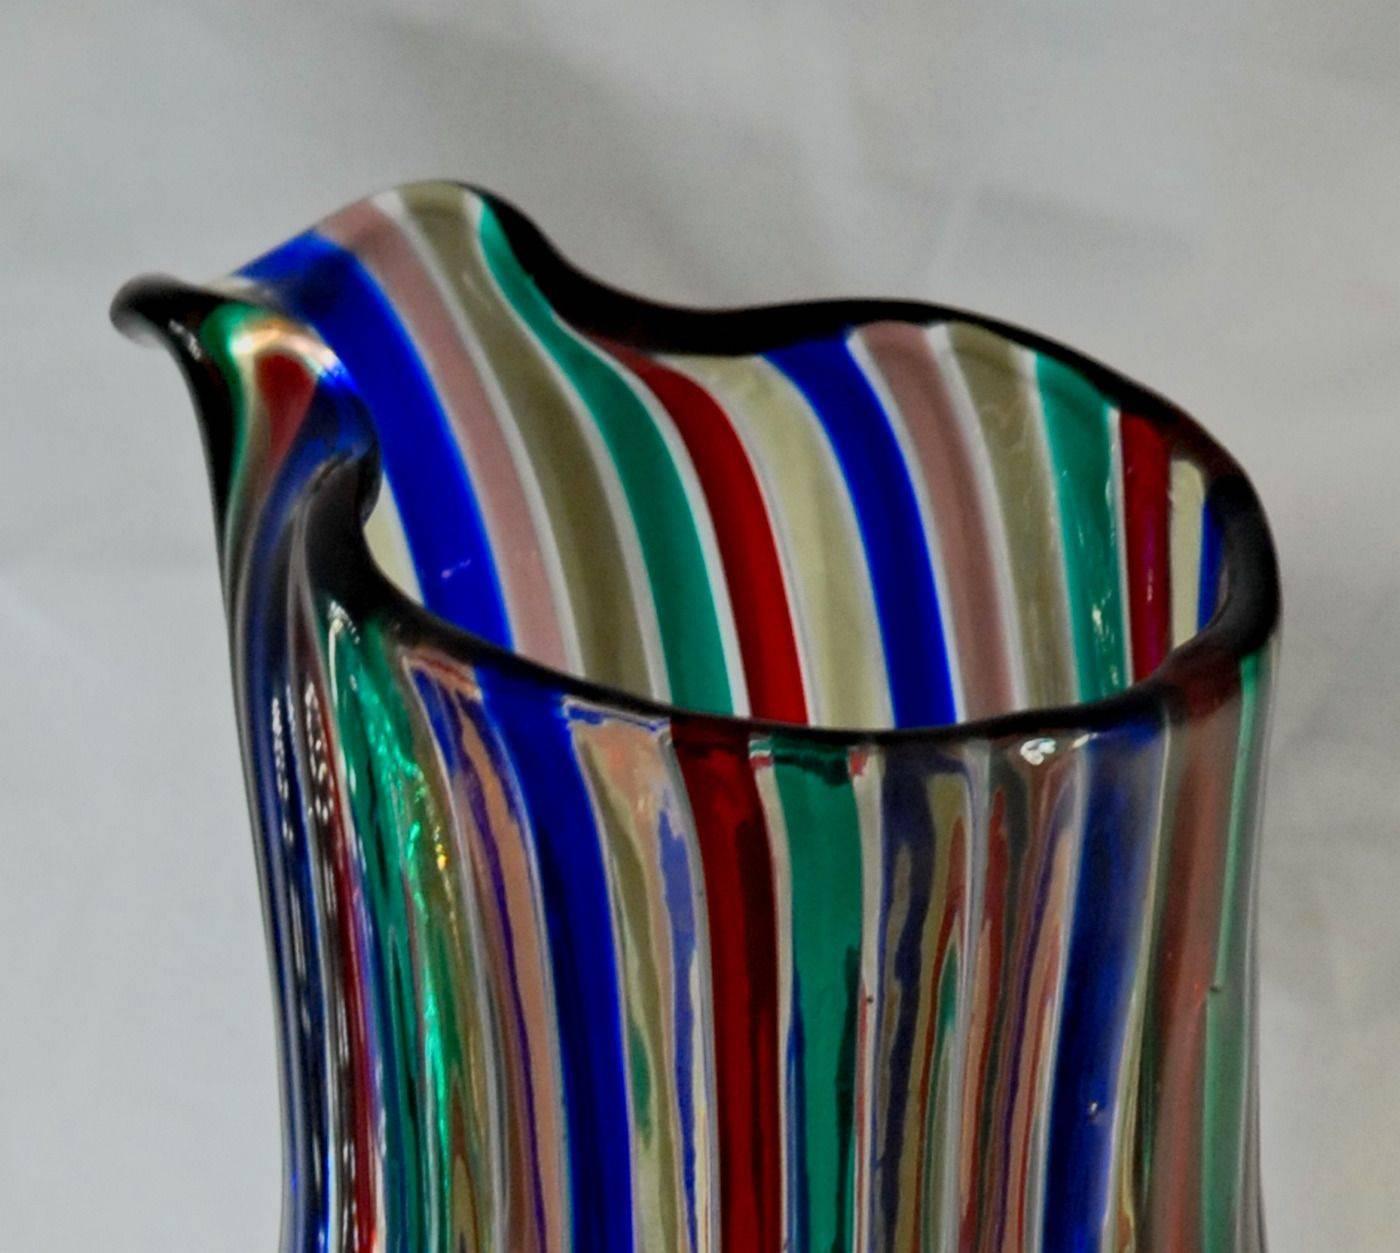 Mid-Century Modern Giò Ponti for Venini, Pitcher from the “A Canne” Collection, 1989, Signed, Label